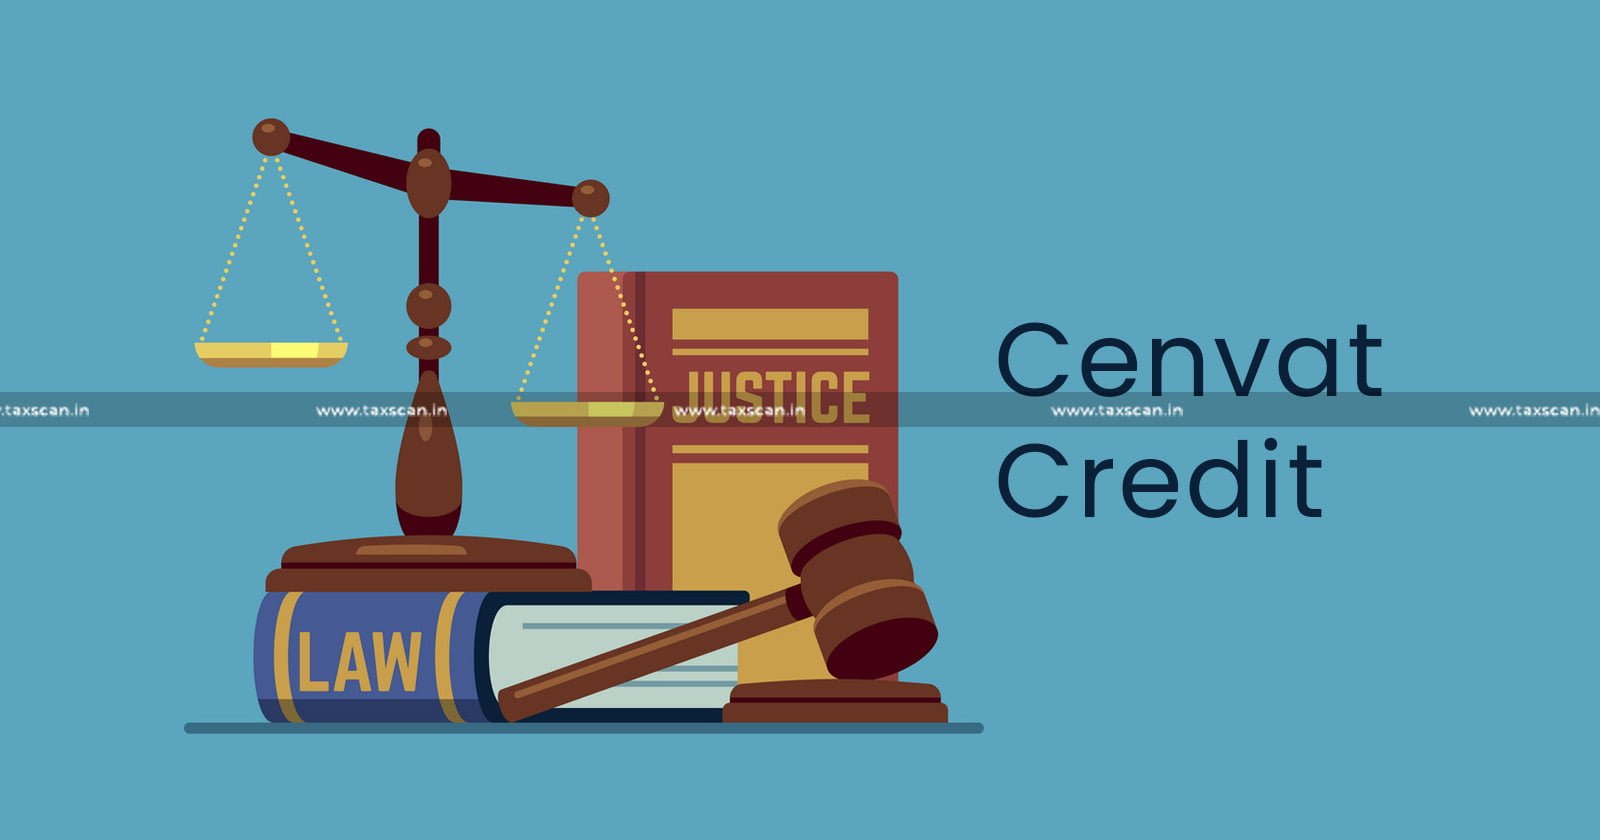 Assessee can either Claim Cenvat Credit or Claim Refund - Cenvat Credit - Refund under Excise Notification - Excise Notification - Refund - Penalty - CESTAT - Taxscan